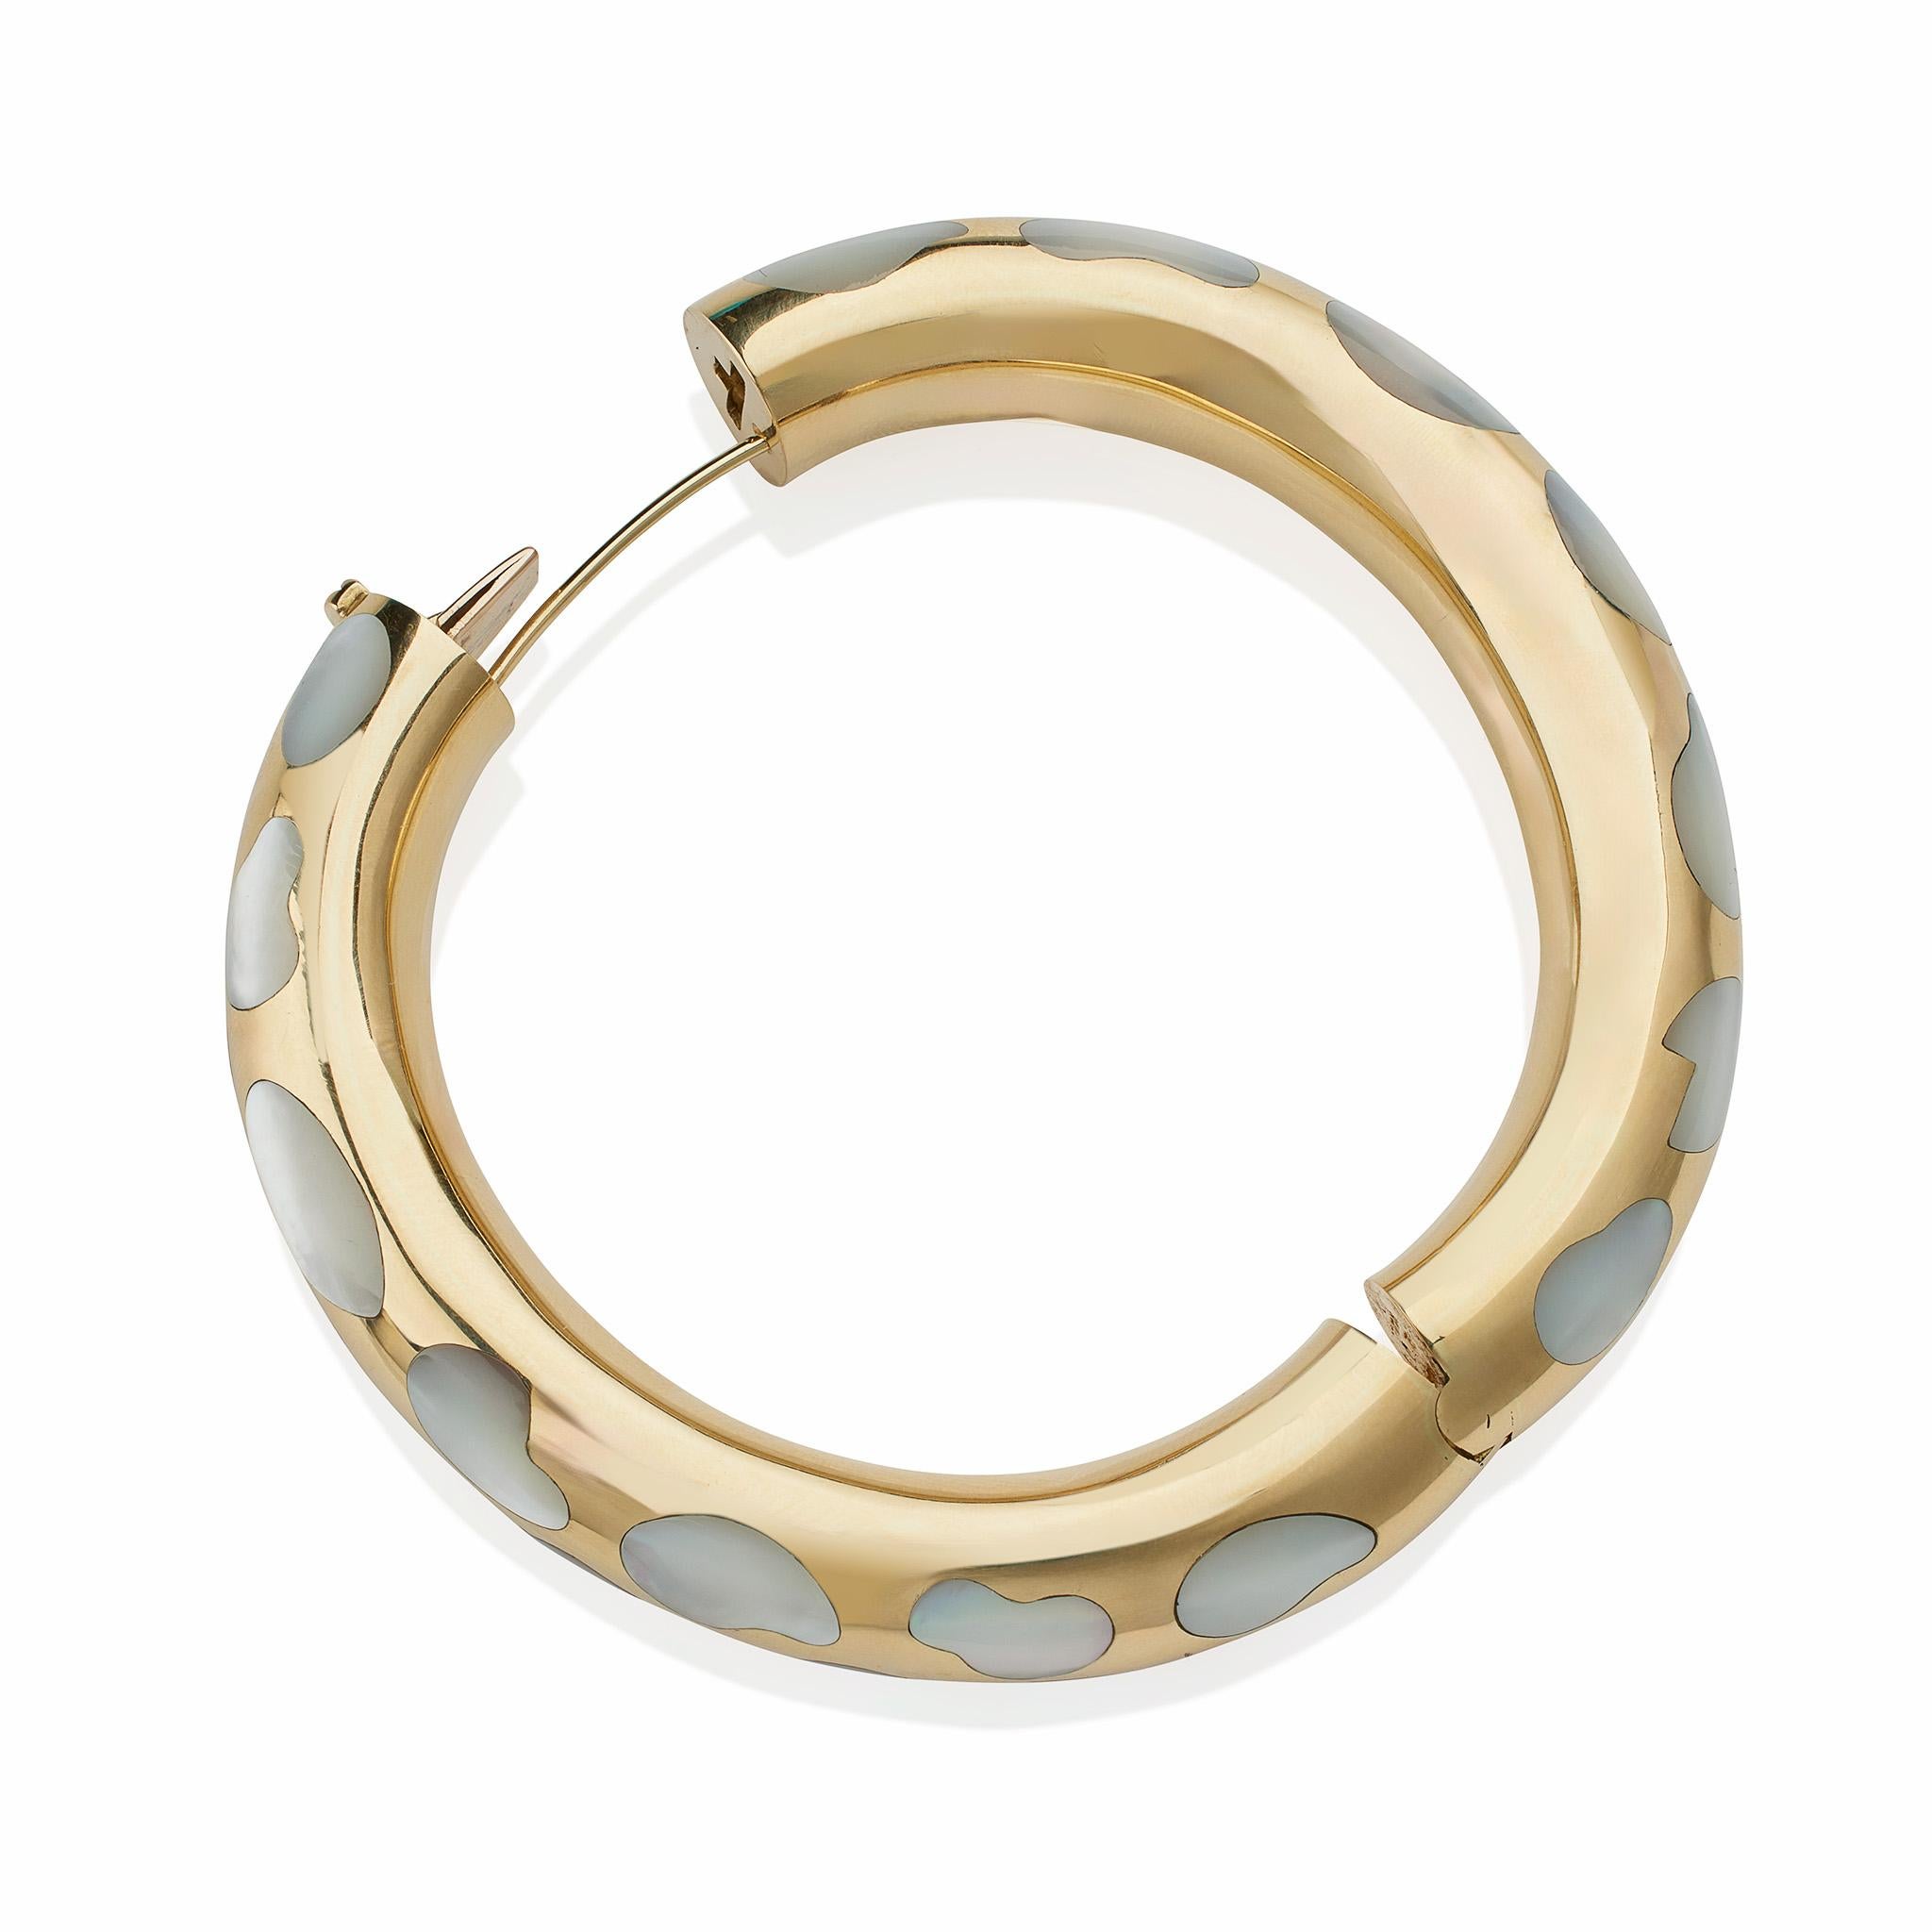 Angela Cummings Tiffany & Co. Mother-of-Pearl and 18K Gold Bangle Bracelet In Excellent Condition For Sale In New York, NY